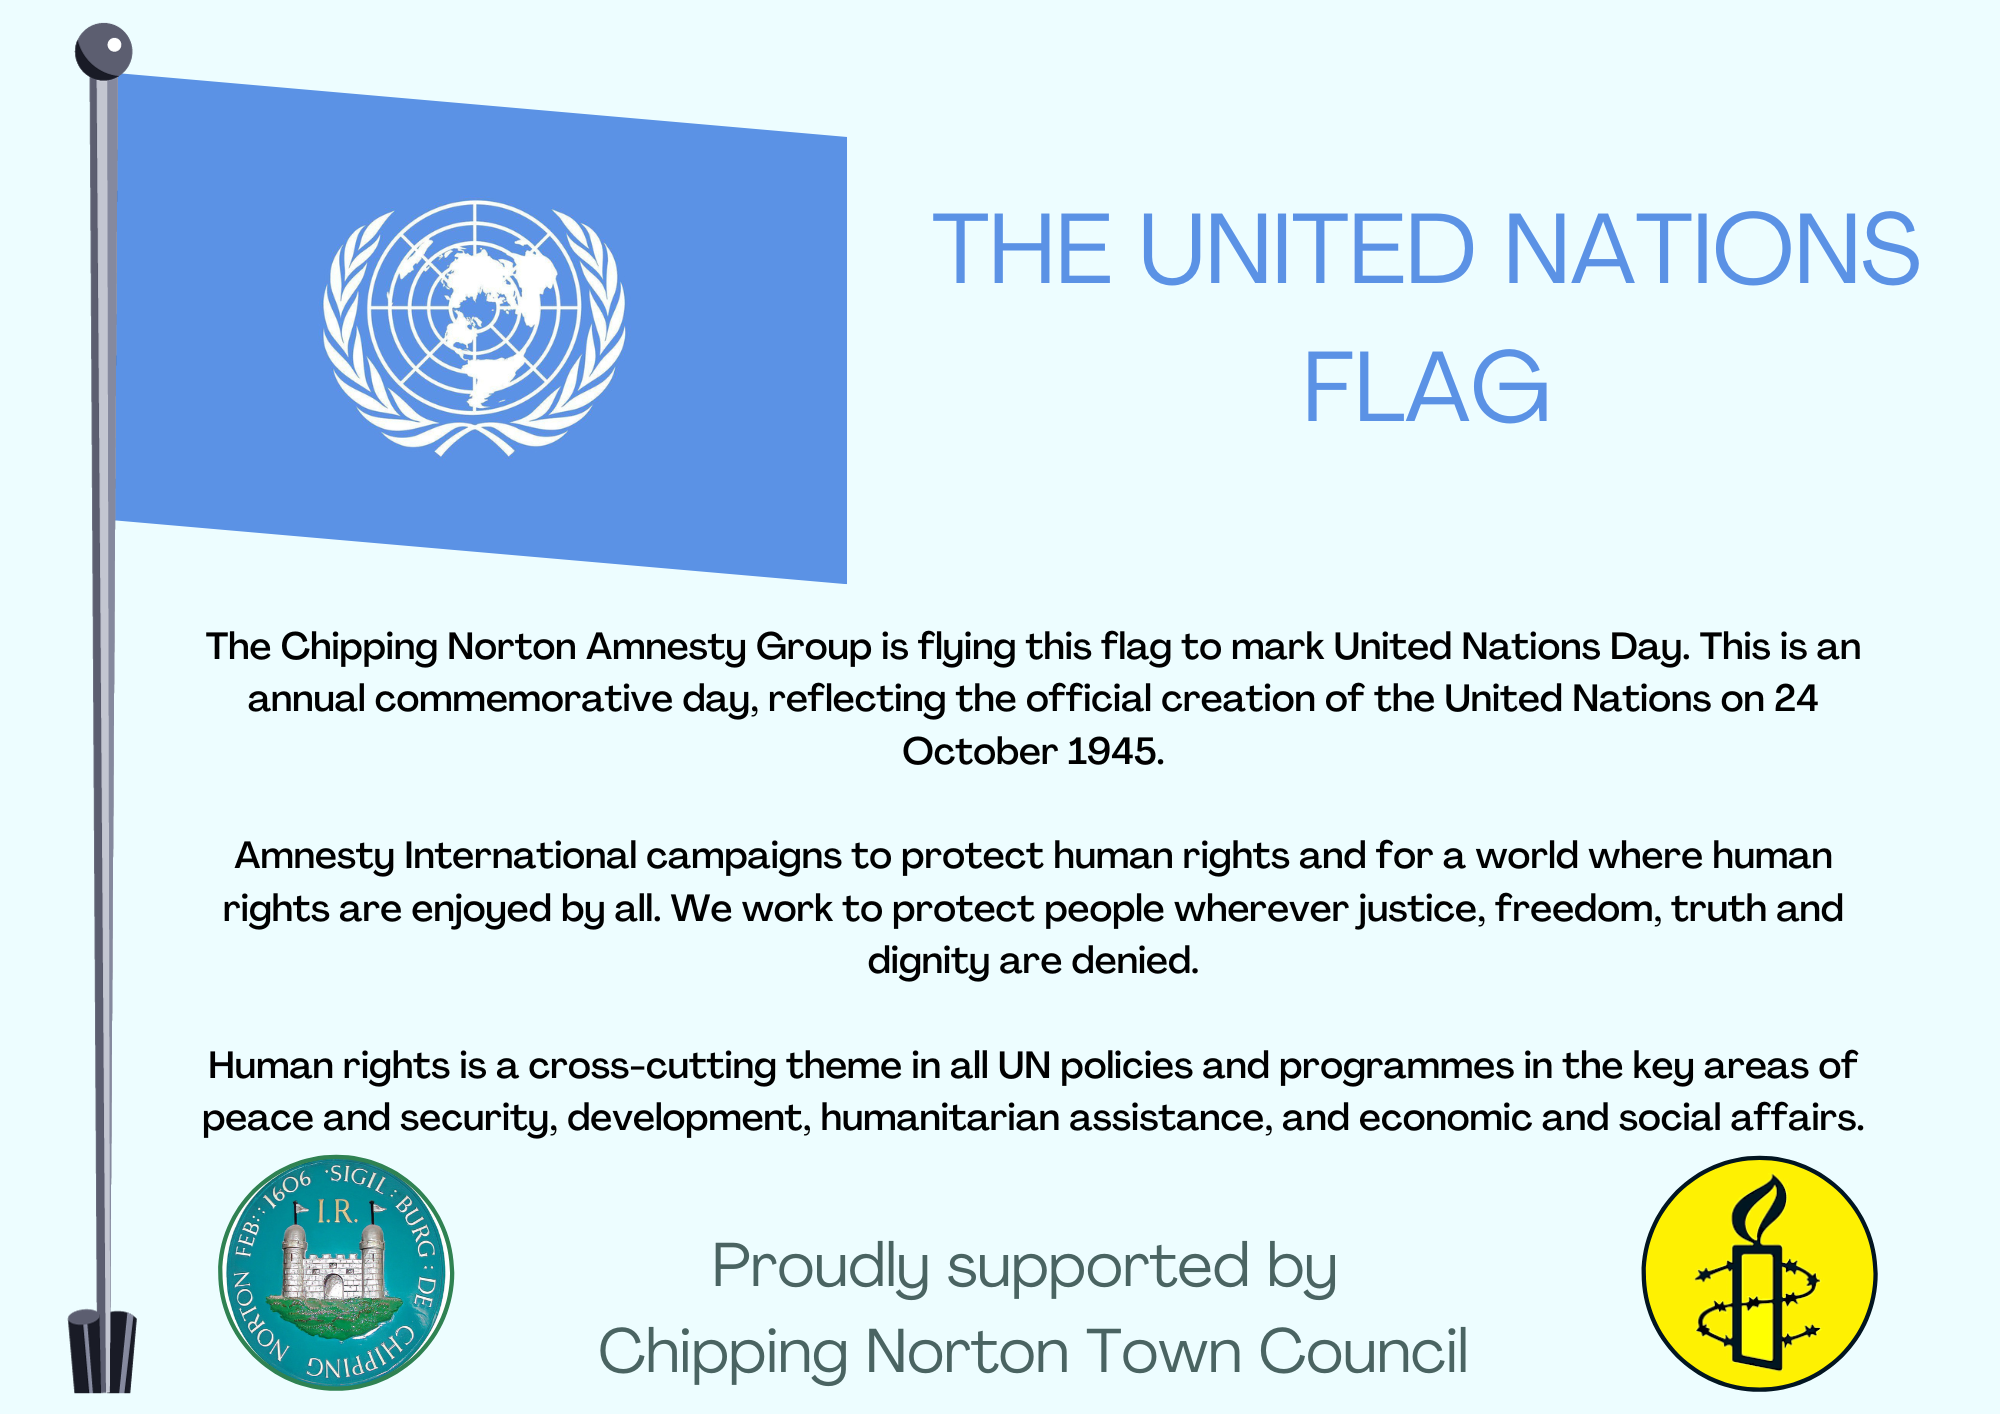 

The Chipping Norton Amnesty Group is flying this flag to mark United Nations Day. This is an annual commemorative day, reflecting the official creation of the United Nations on 24 October 1945.

Amnesty International campaigns to protect human rights and for a world where human rights are enjoyed by all. We work to protect people wherever justice, freedom, truth and dignity are denied.

Human rights is a cross-cutting theme in all UN policies and programmes in the key areas of peace and security, development, humanitarian assistance, and economic and social affairs.
